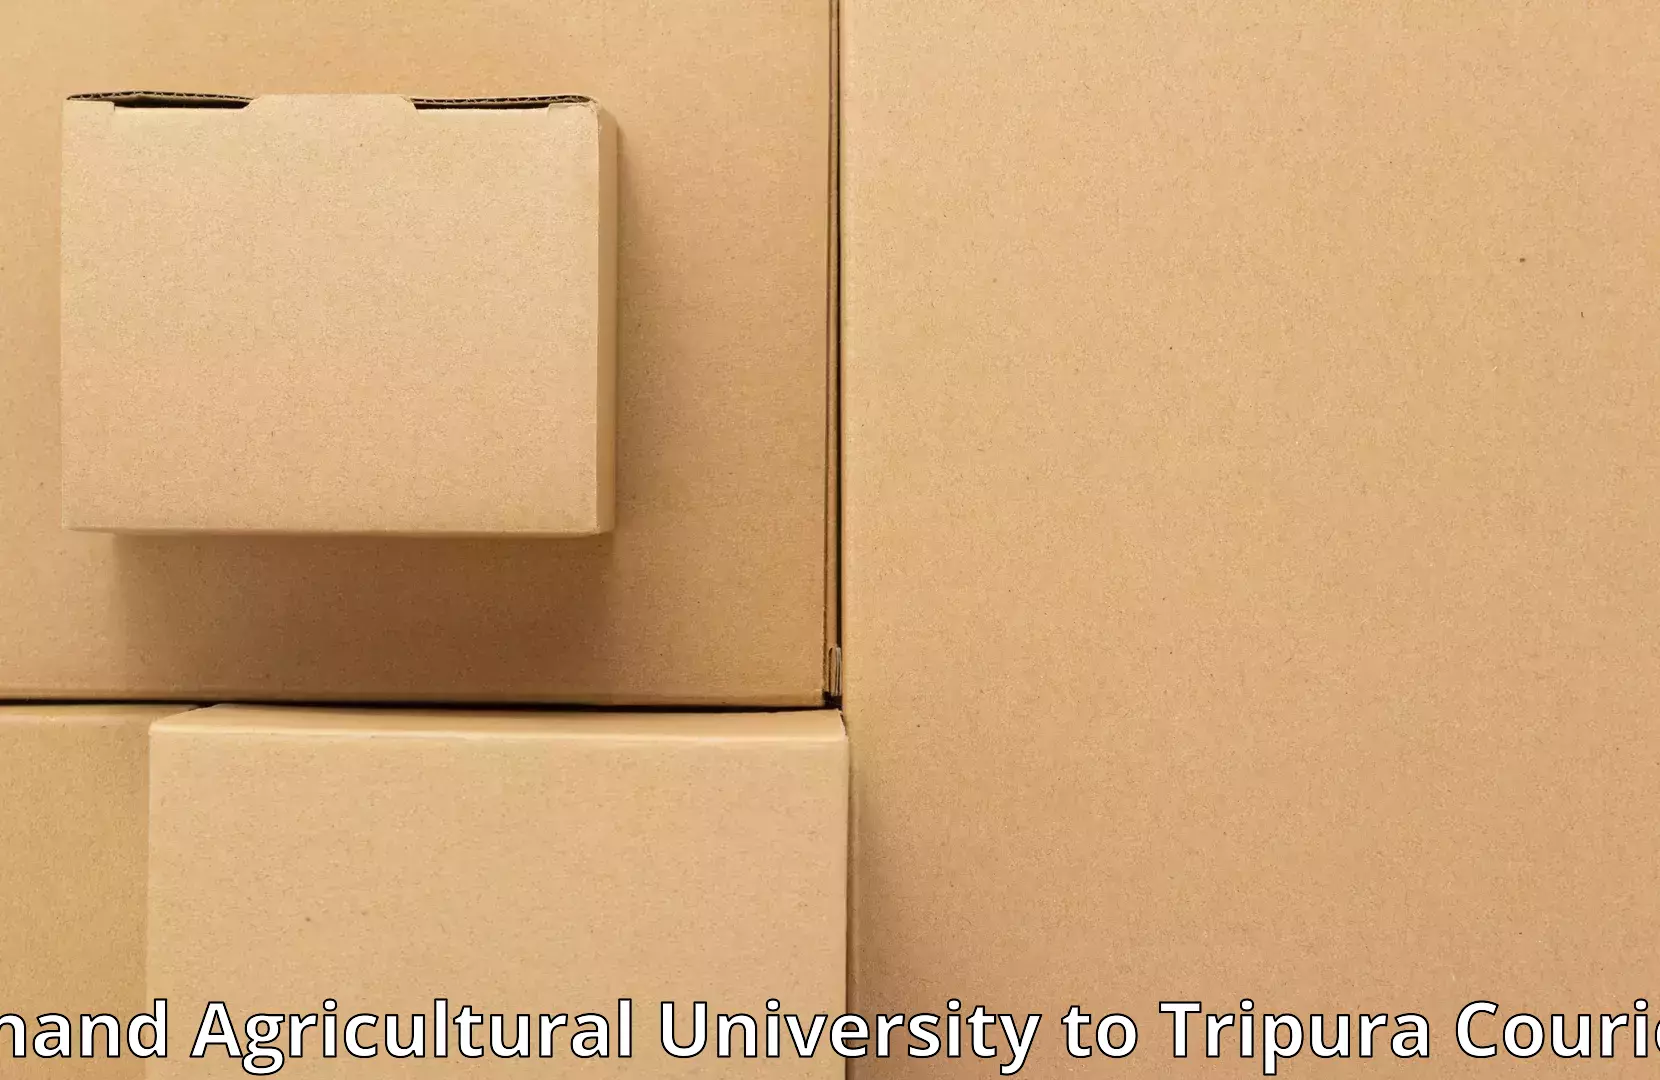 Furniture transport services Anand Agricultural University to Tripura